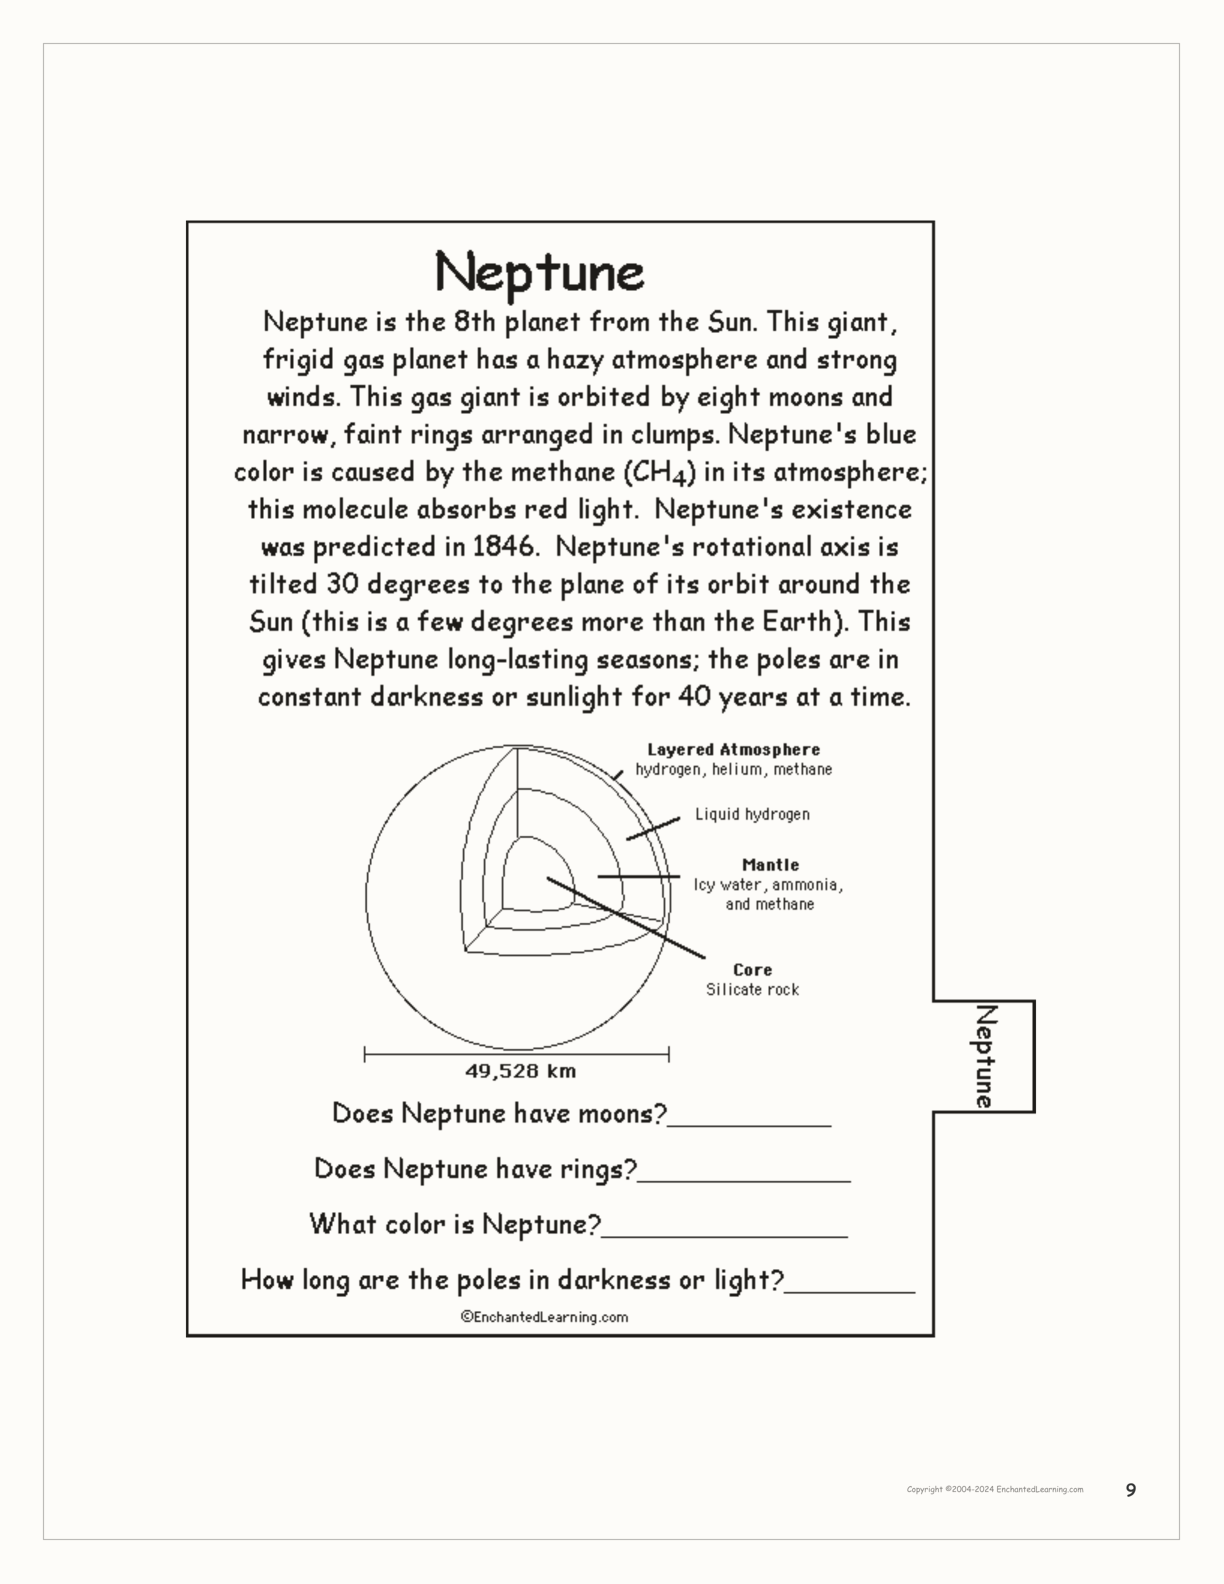 The Planets of our Solar System Book interactive printout page 9